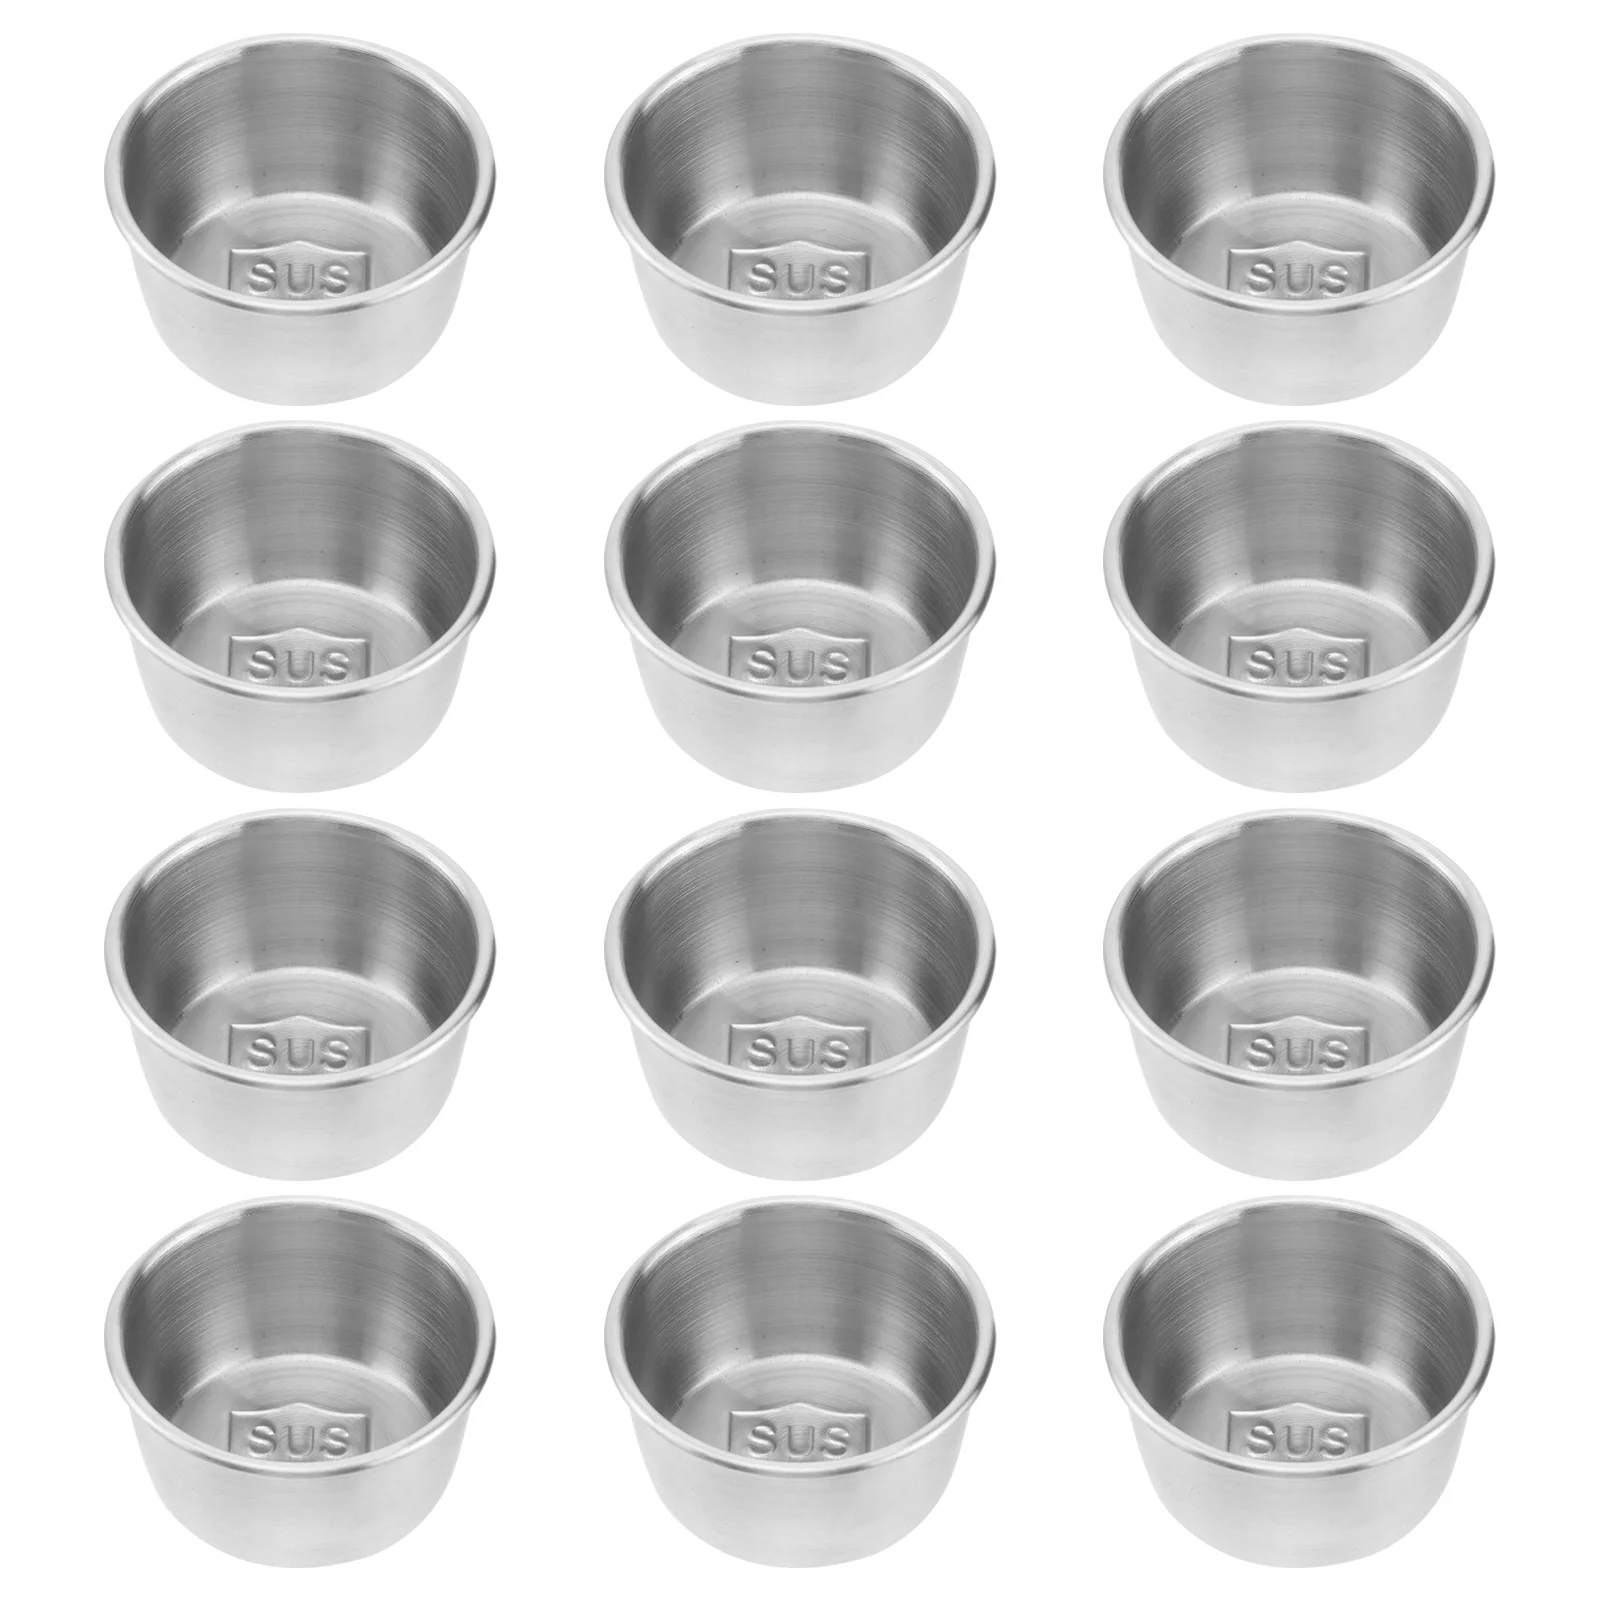 

Sauce Cups Dipping Bowls Condiment Dish Stainless Steel Bowl Container Cup Mini Metal Dishes Soy Ramekins Portion Seasoning